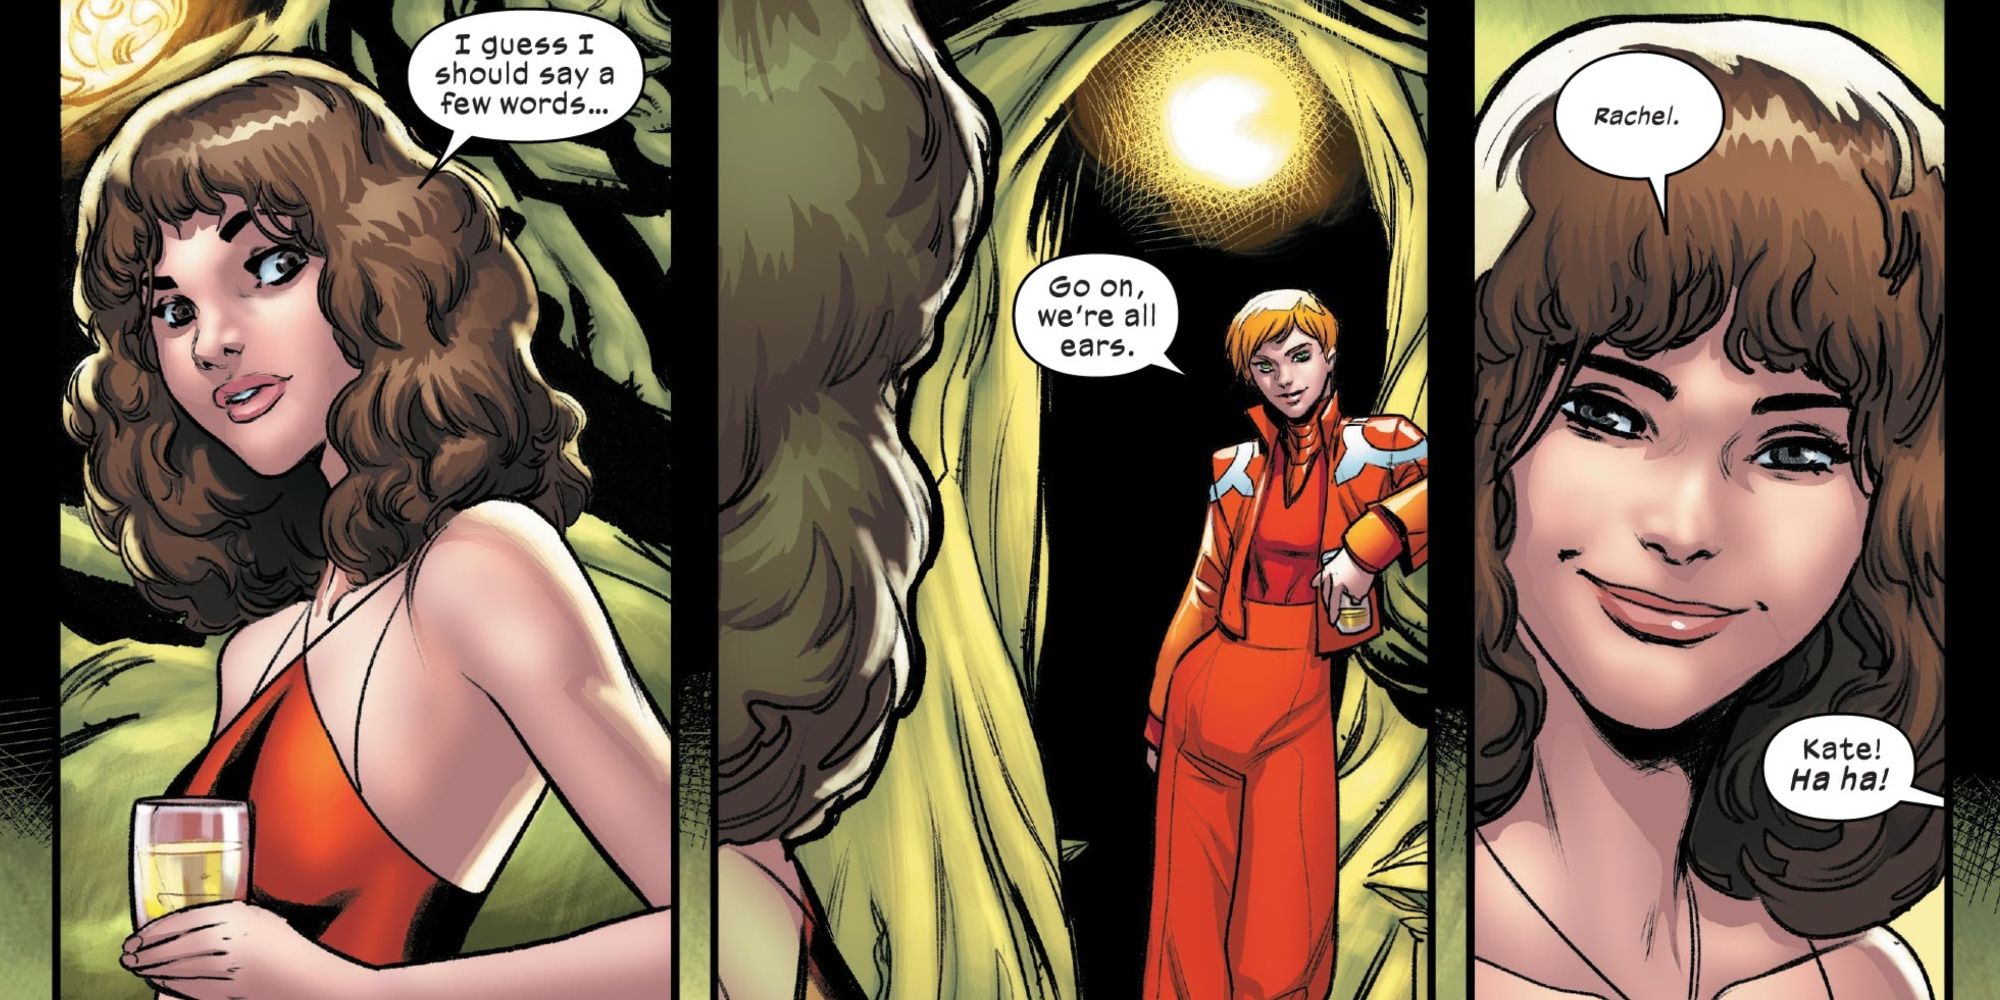 Kitty Pryde shares a moment with Rachel Summers in Marauders #12 comic.